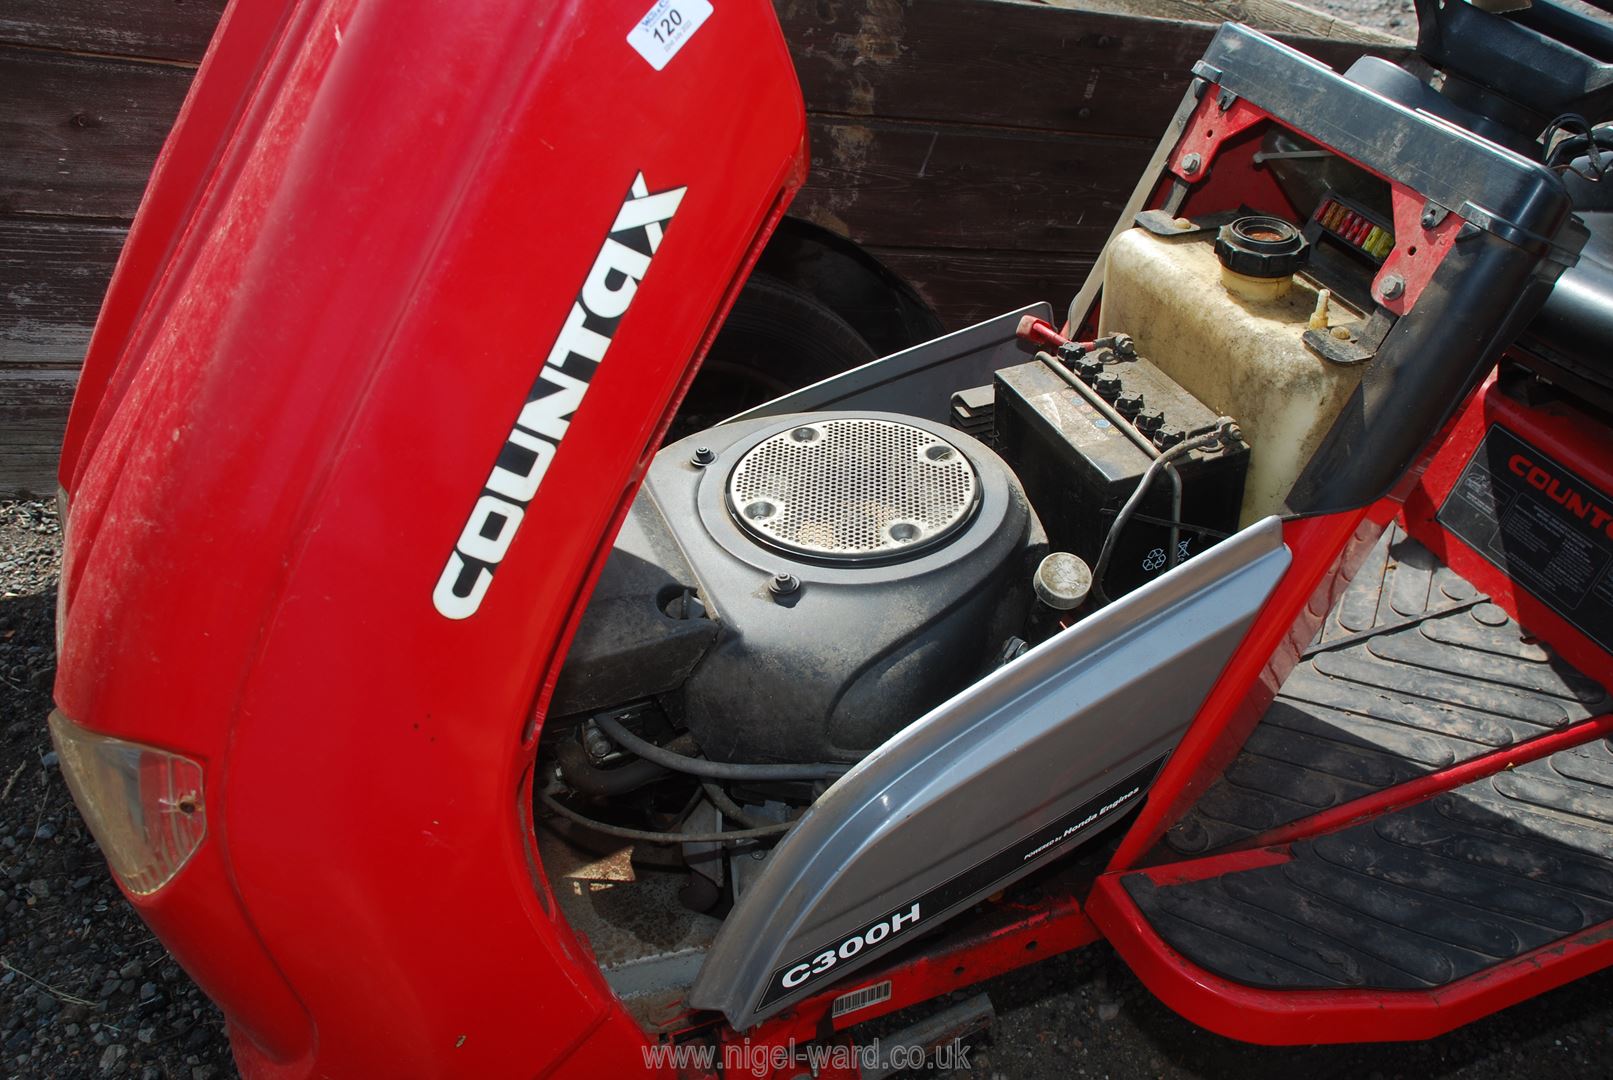 A 'Countax' ride-on tractor/mower (model no: C300H) with electric-start Honda V-twin engine, - Image 4 of 4